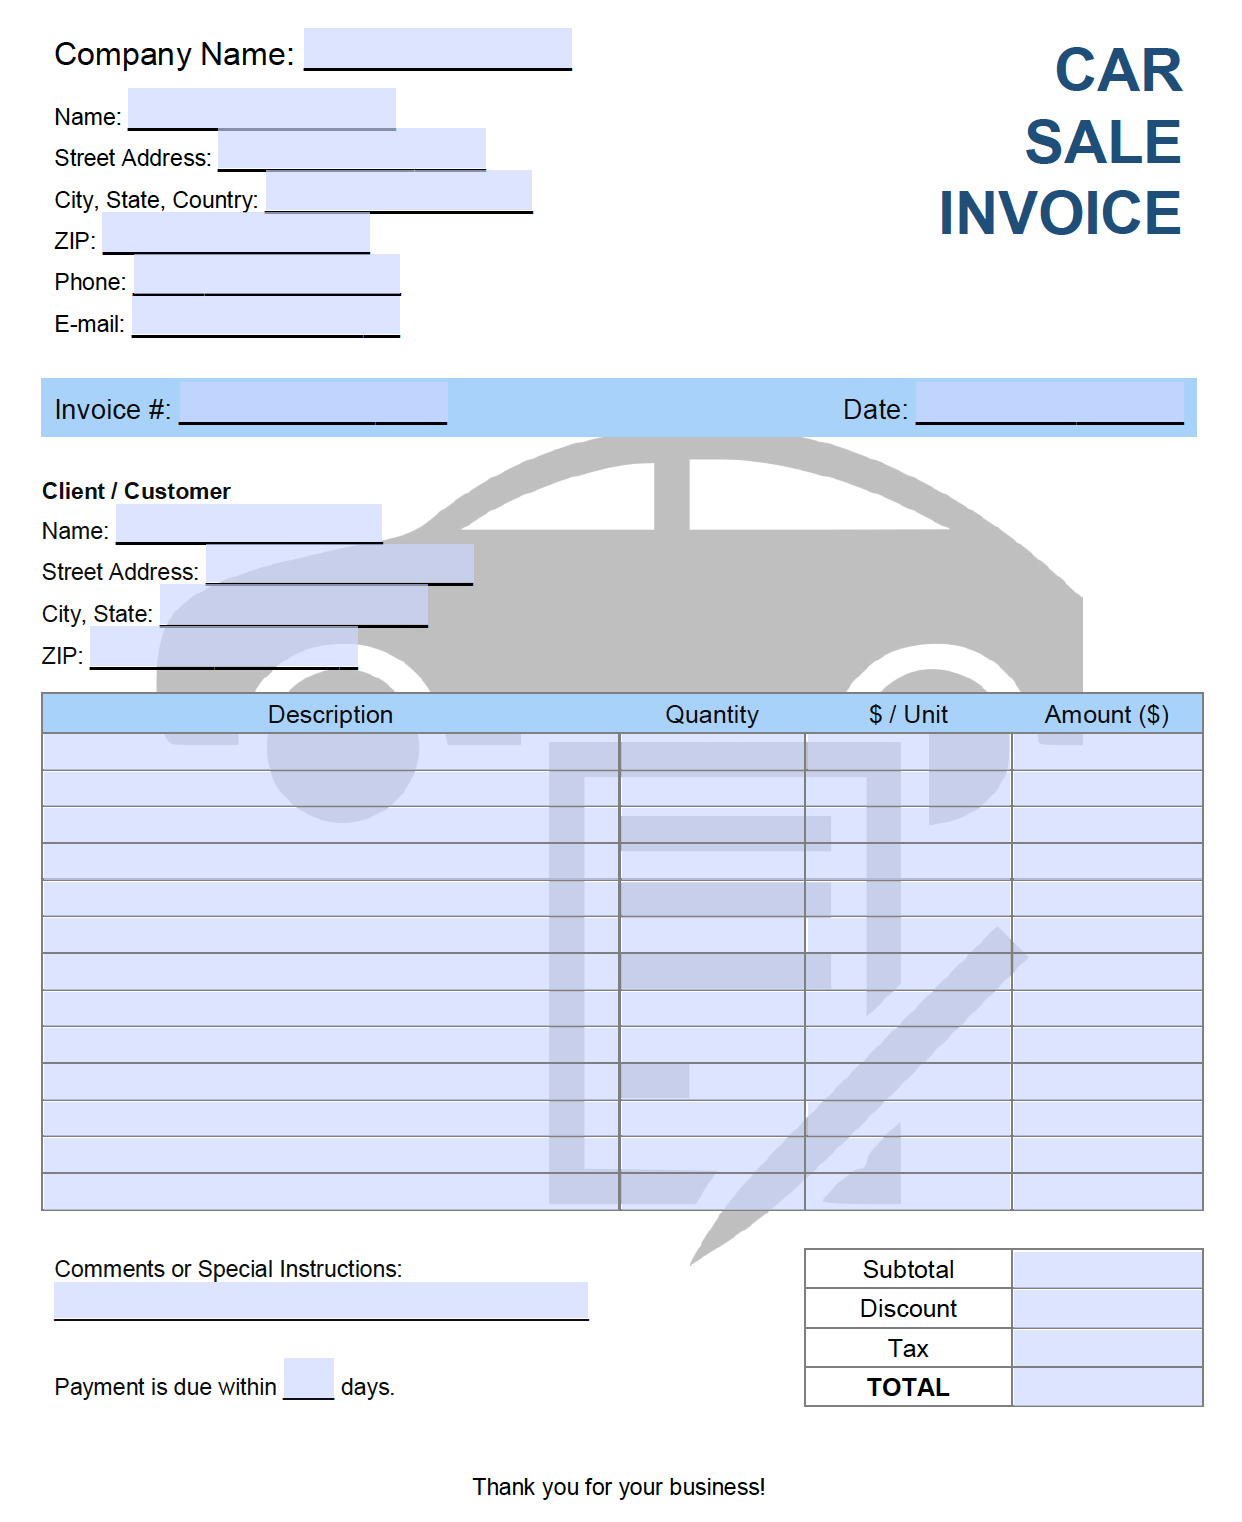 Free Car Sales Invoice Template  PDF  WORD  EXCEL